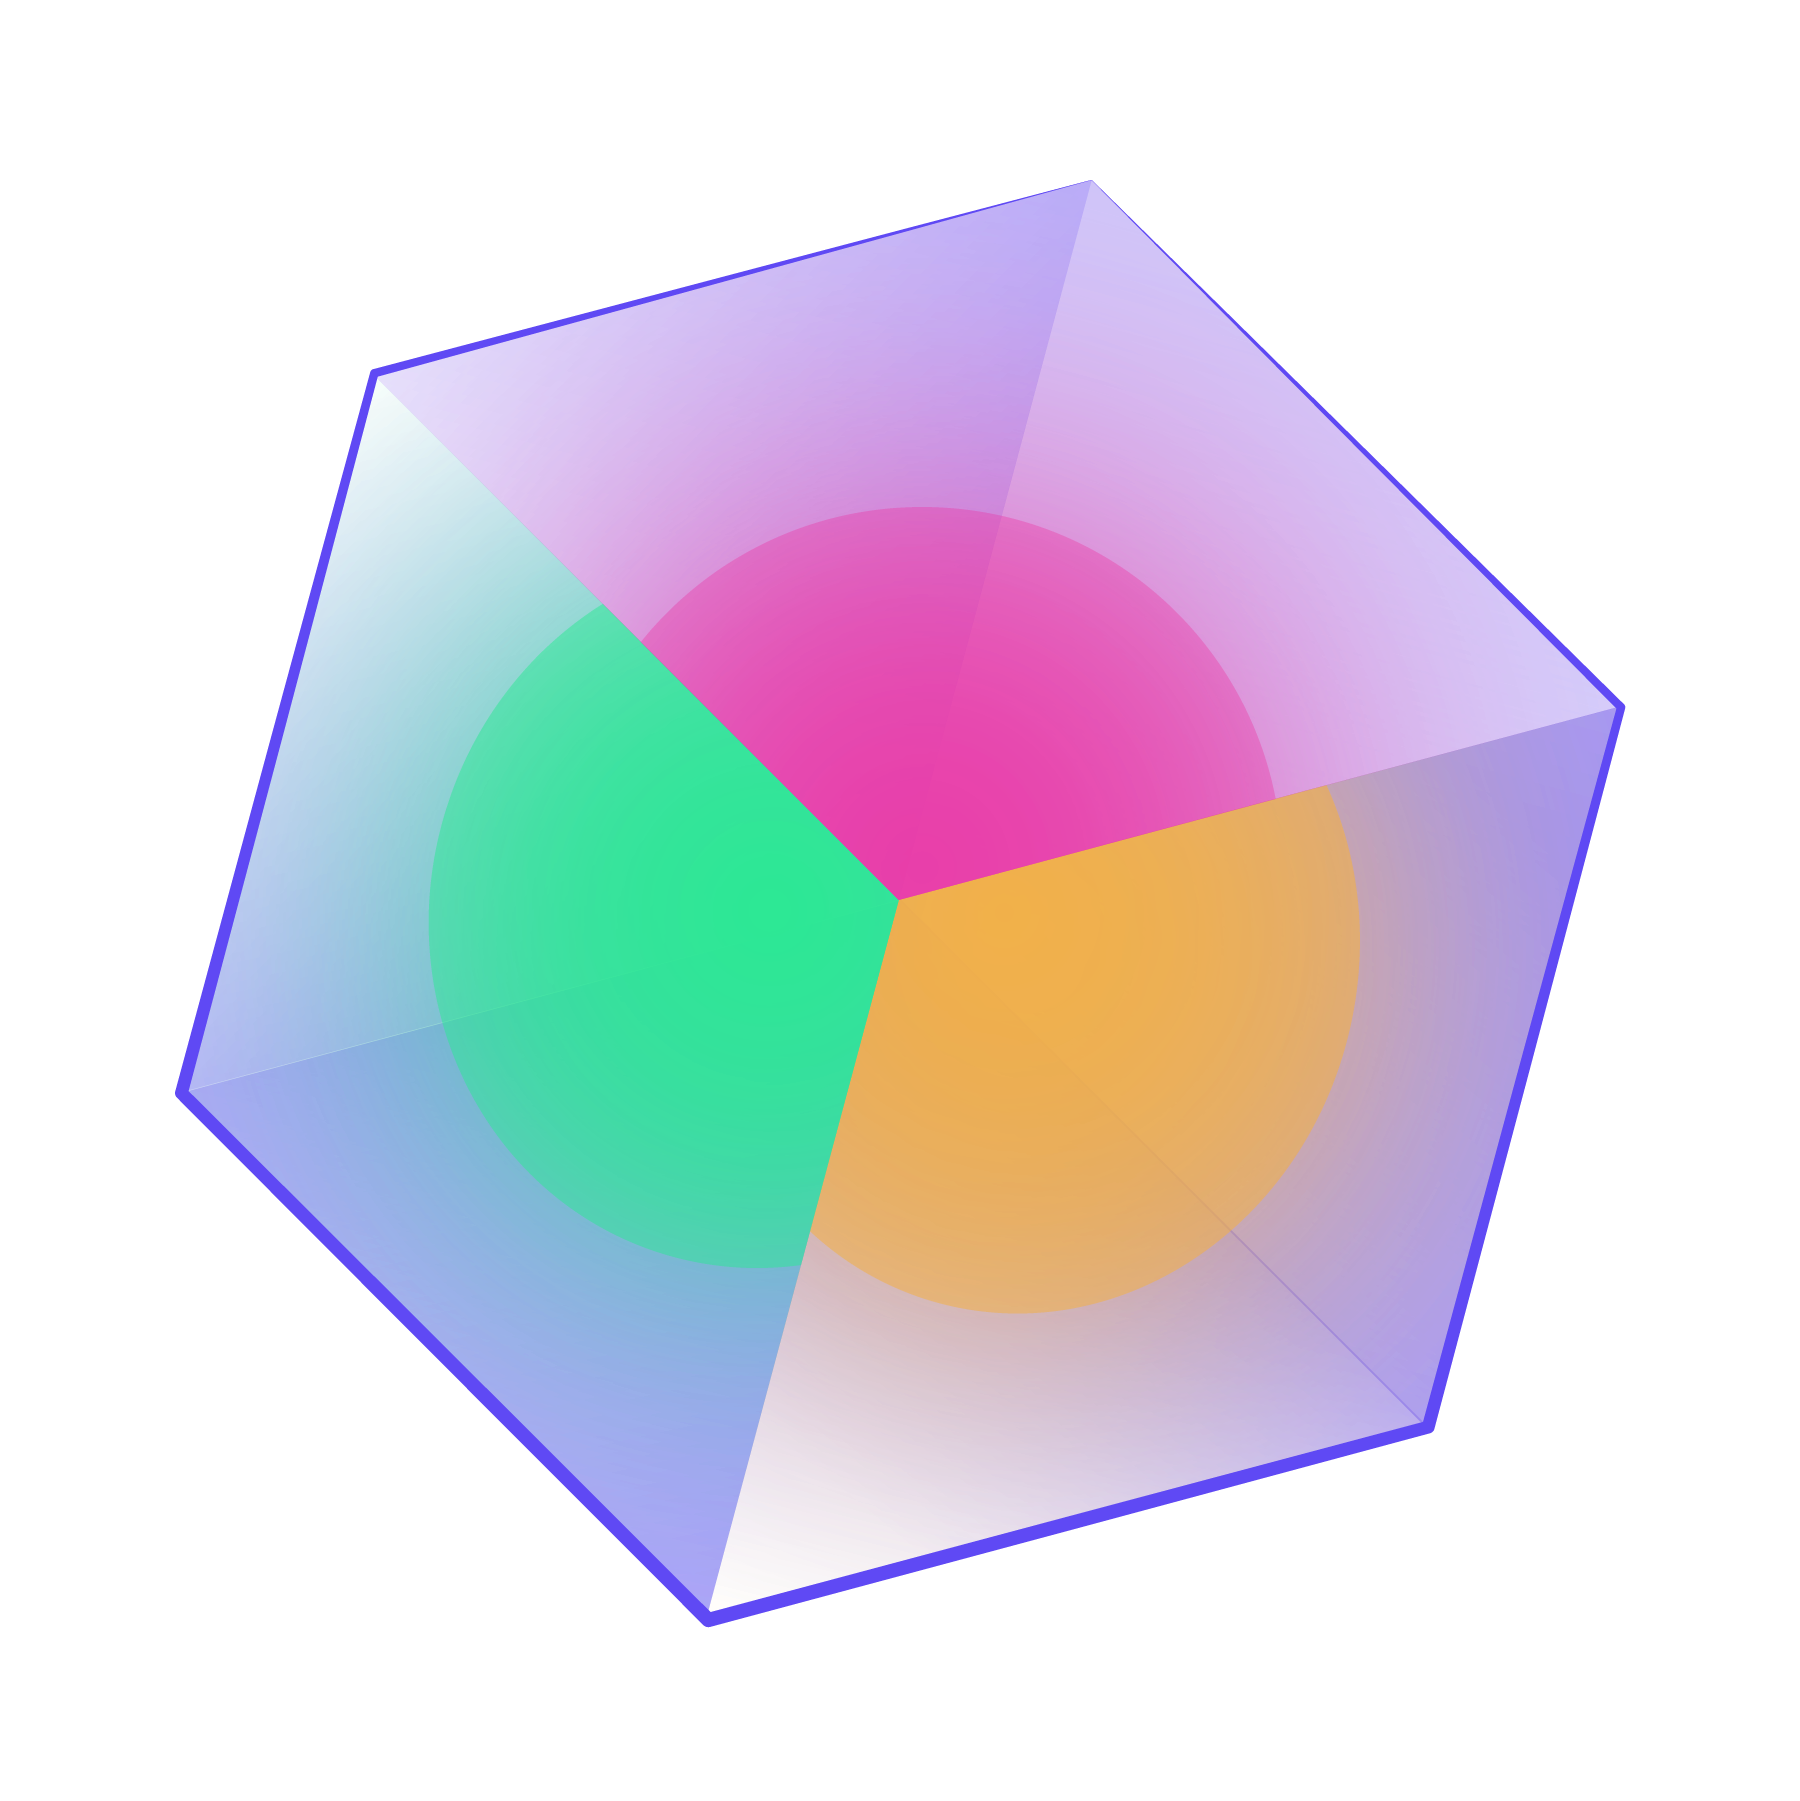 Cube with colored circles